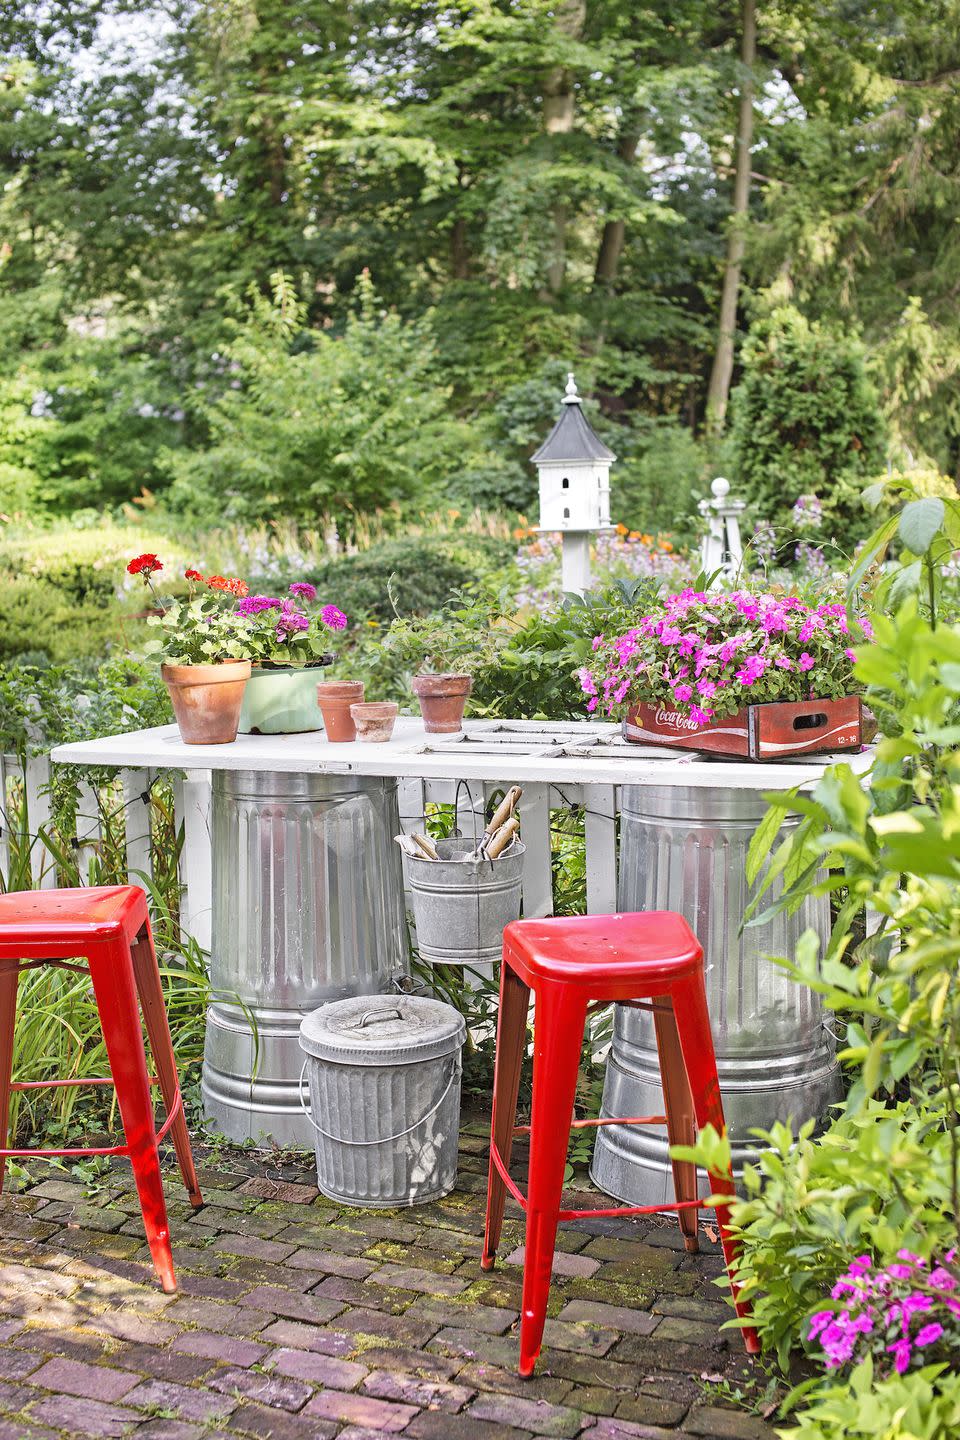 <p>Take upcycling to the next level: For a budget-friendly work bench, attach an old door or piece of wood to two waist-height metal pails or garbage cans. Place it near your garden, so you can keep your eye on your bounty as you work your magic. </p>